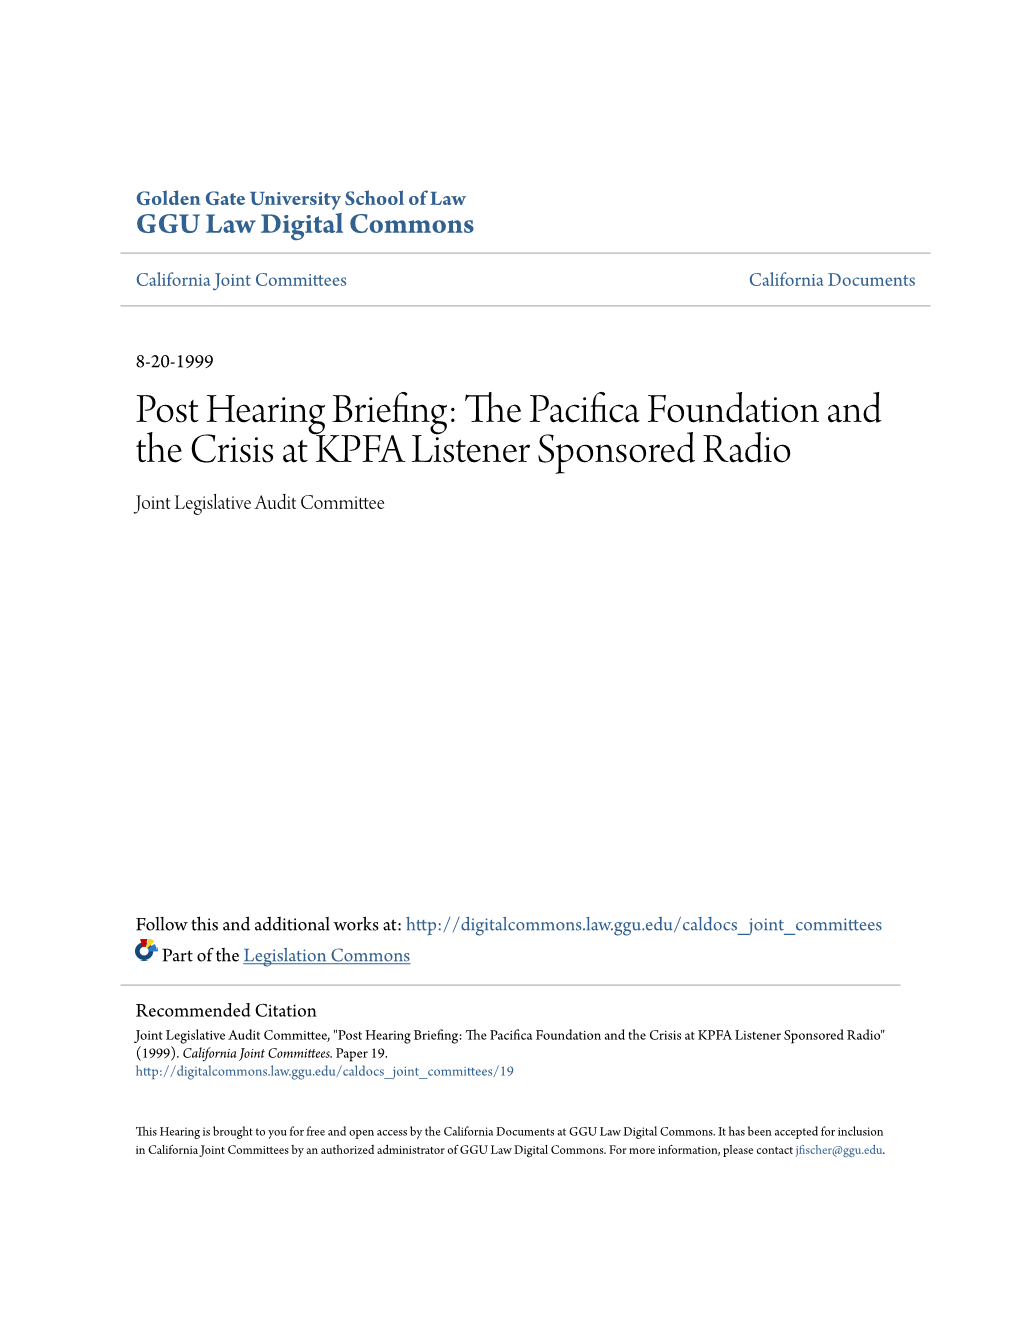 The Pacifica Foundation and the Crisis at KPFA Listener Sponsored